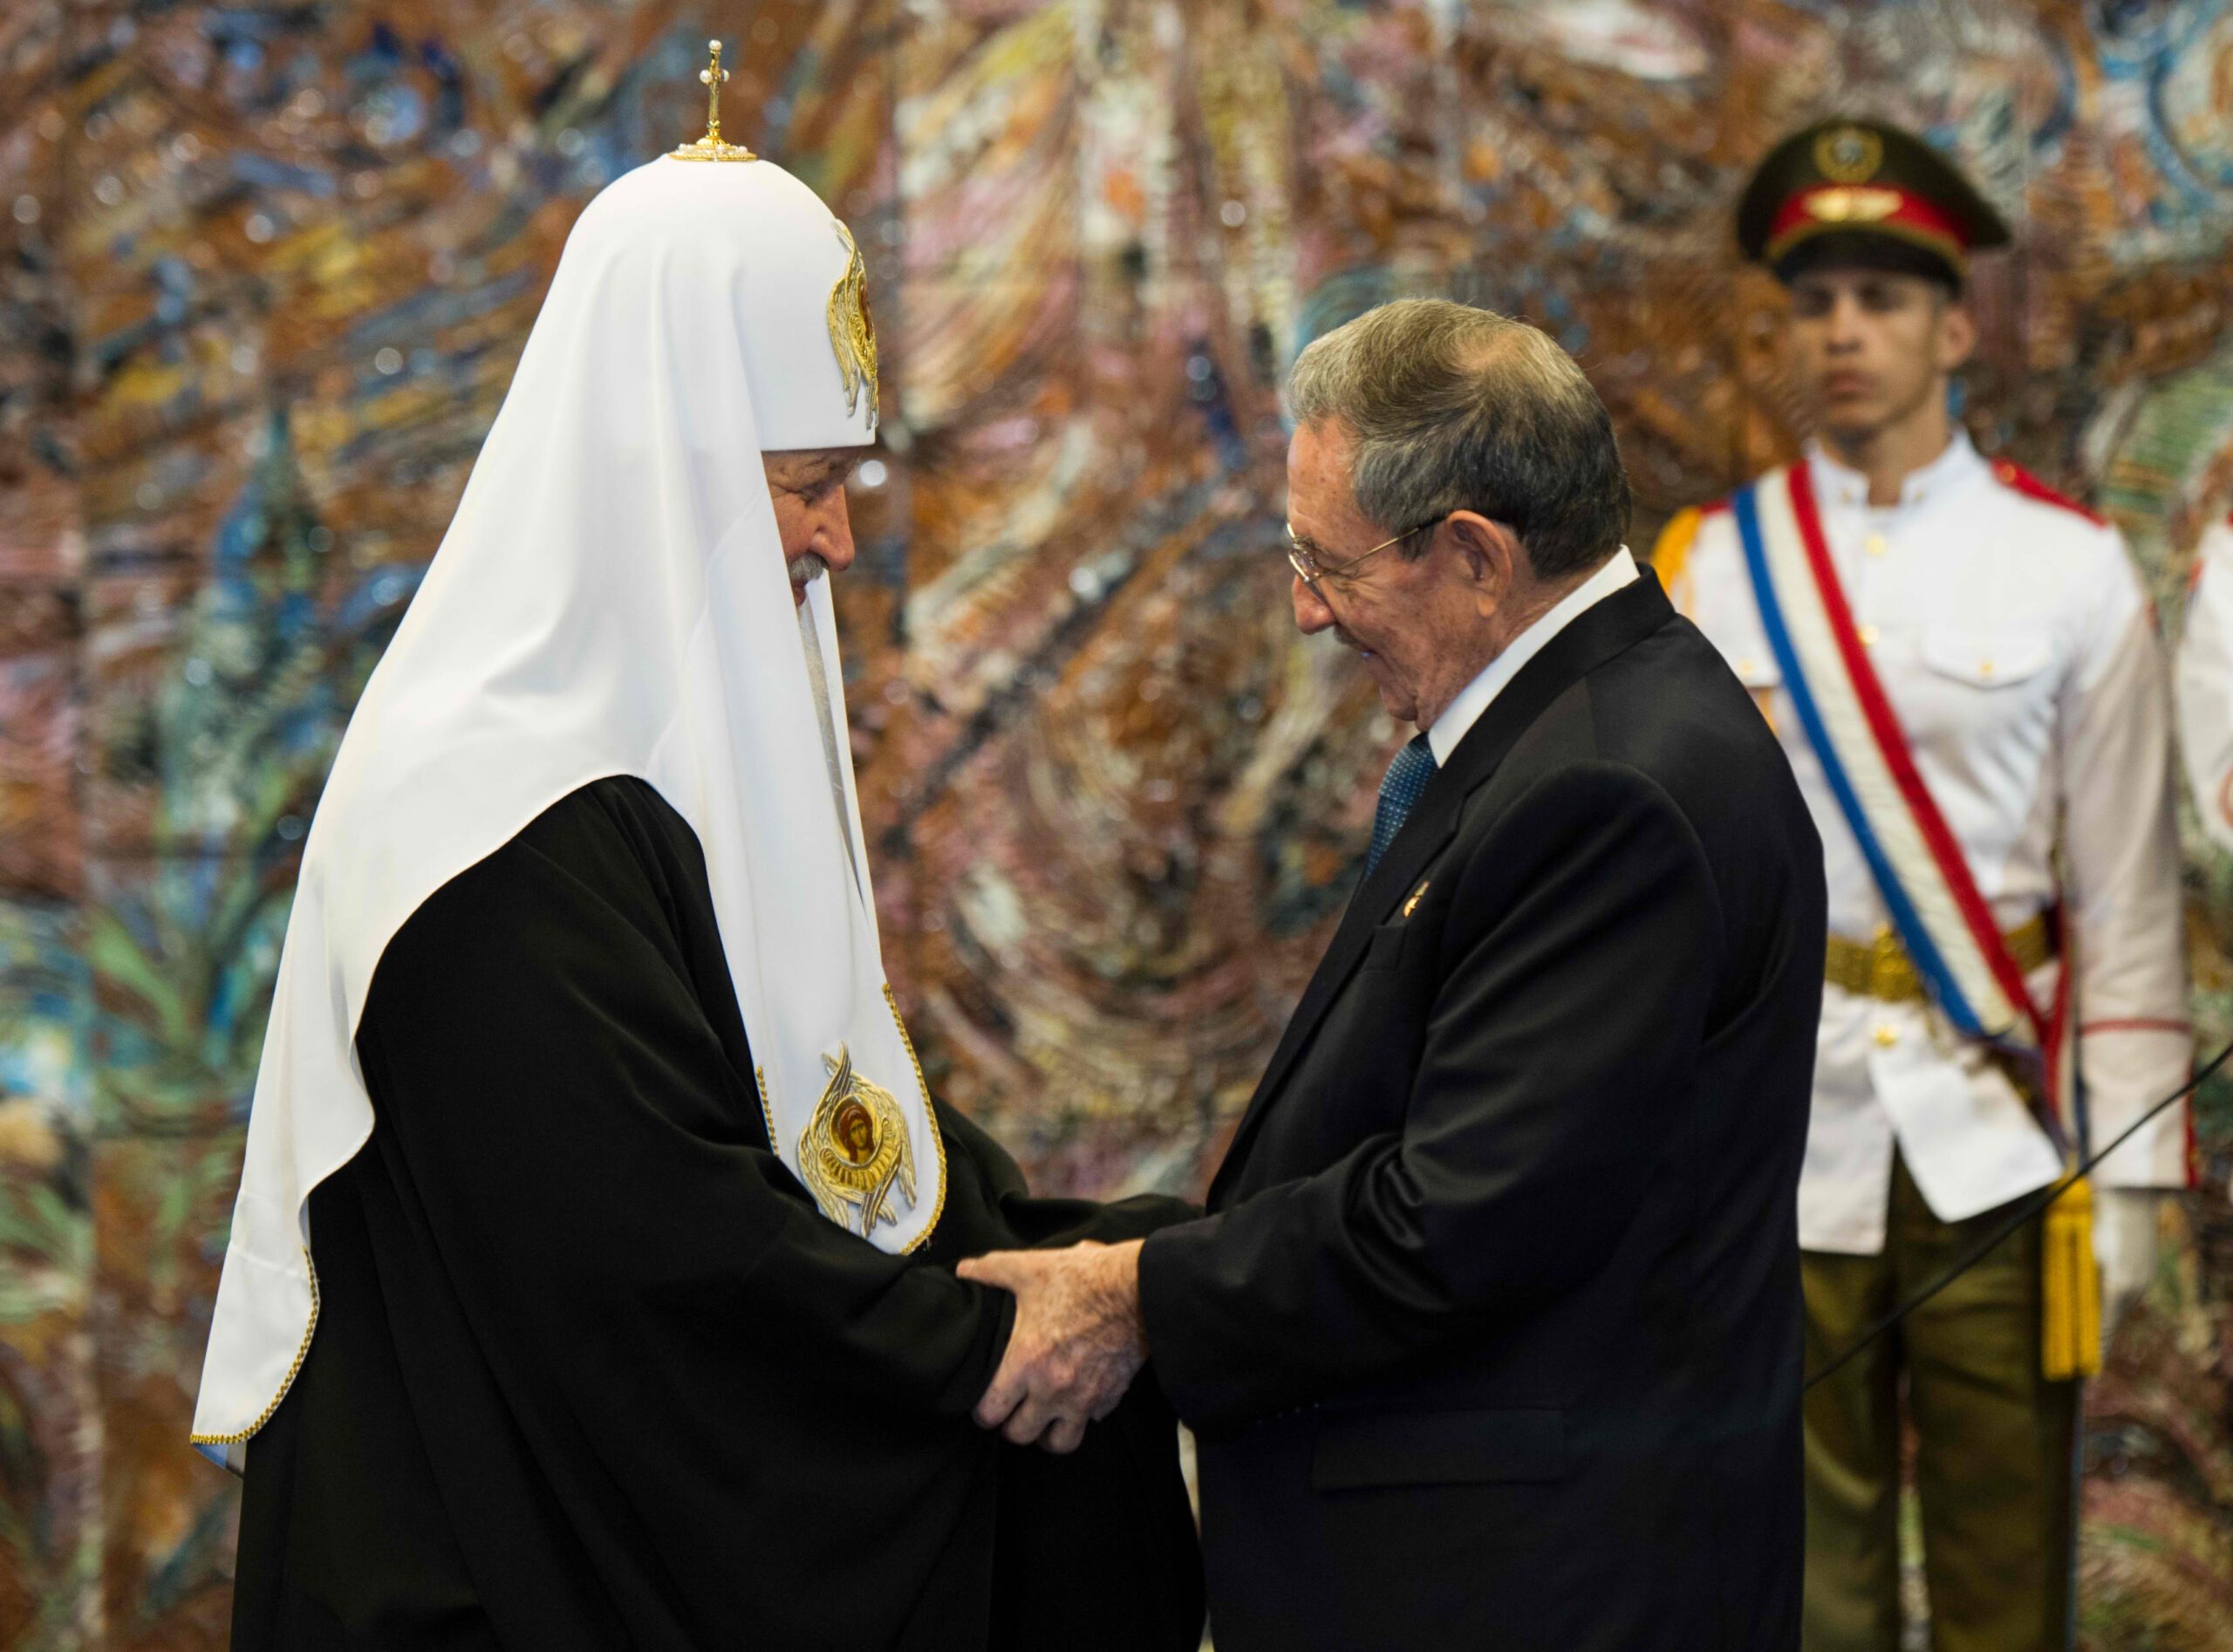 Cuba decorates Russia patriarch after pope visit